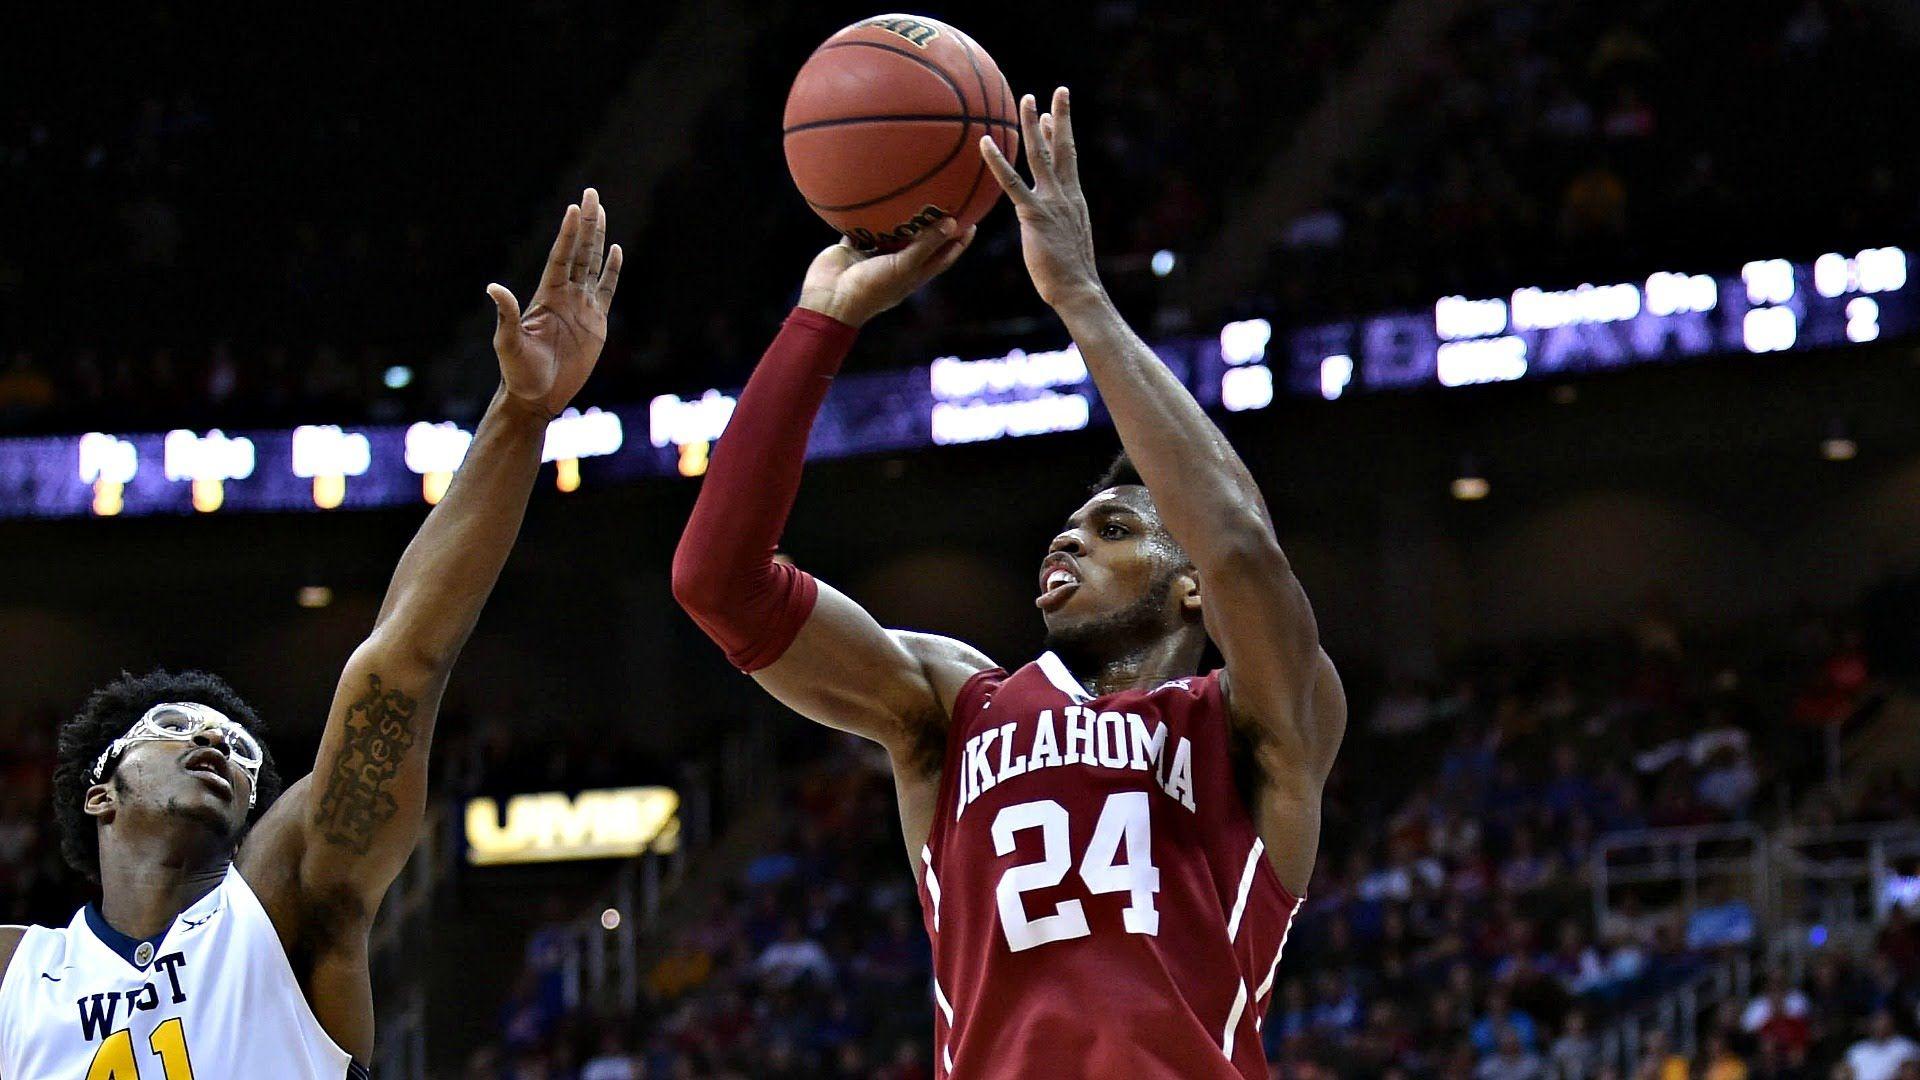 Oklahoma's Buddy Hield Drains Half Court Shot.After The Buzzer